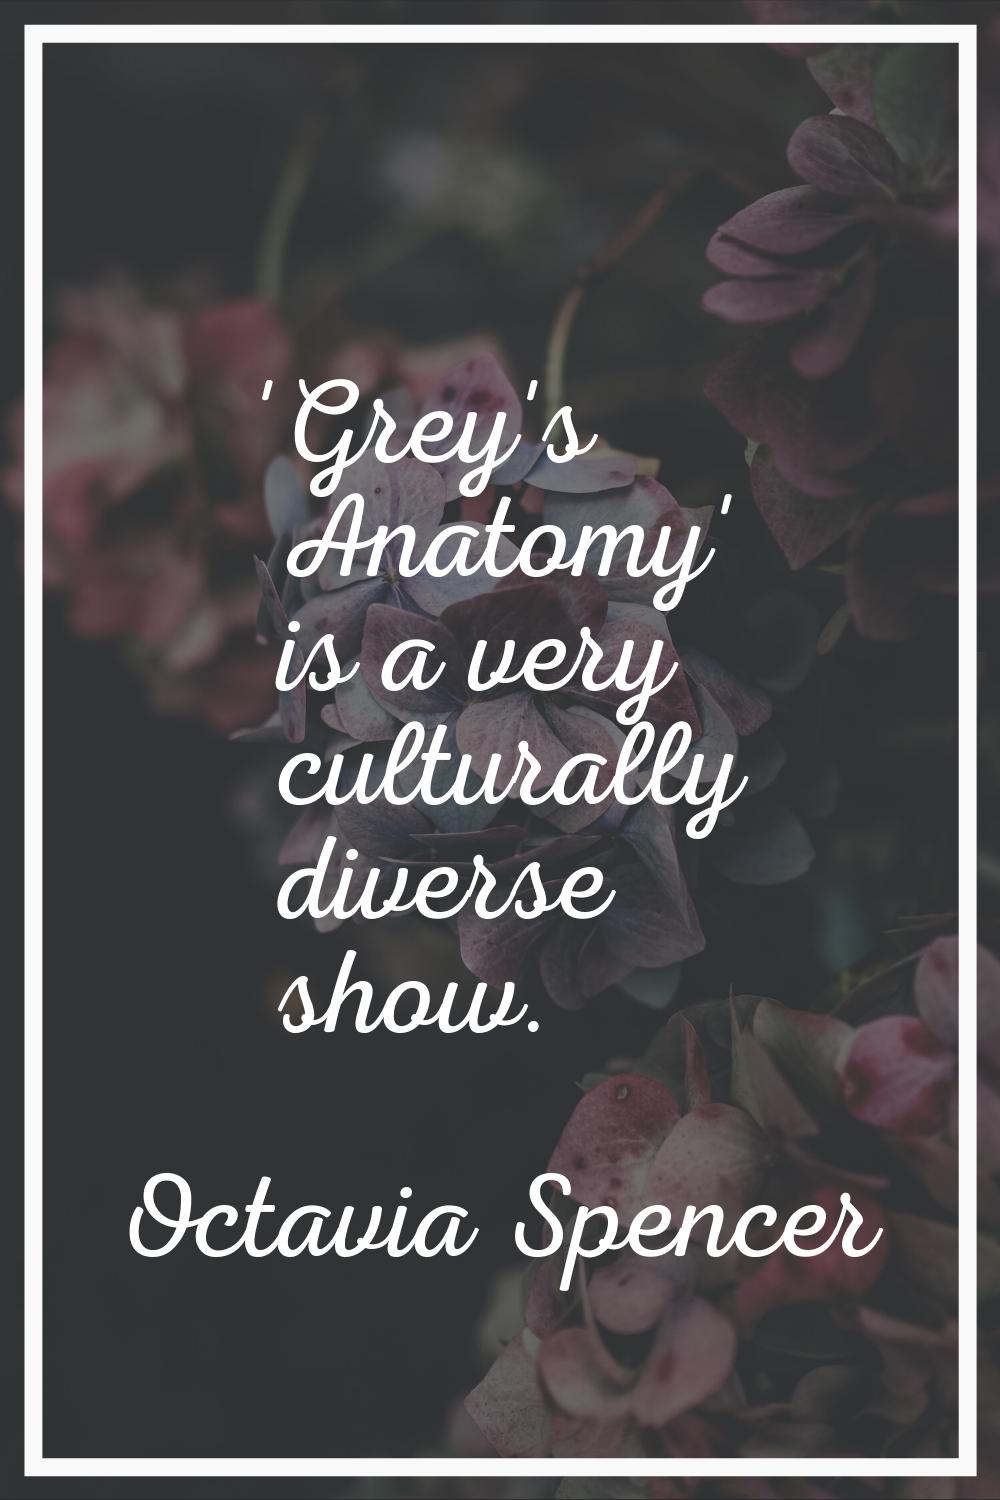 'Grey's Anatomy' is a very culturally diverse show.